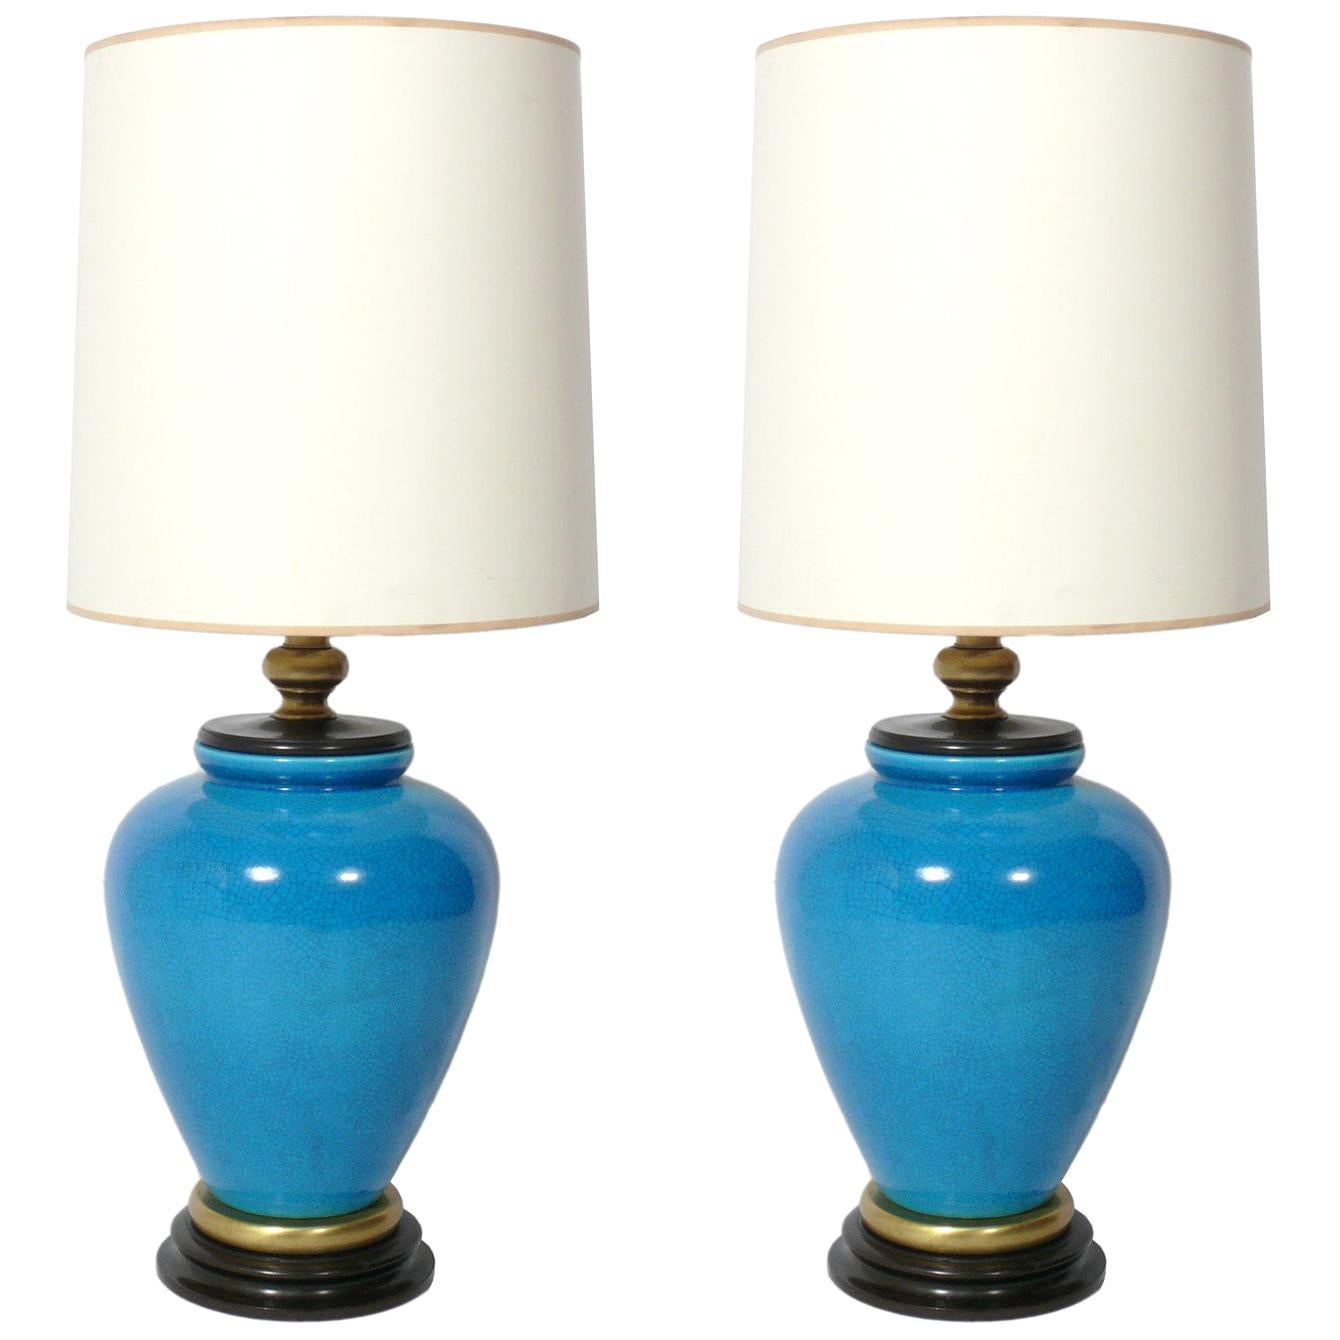 Pair of Large Scale Turquoise Blue Ceramic Lamps